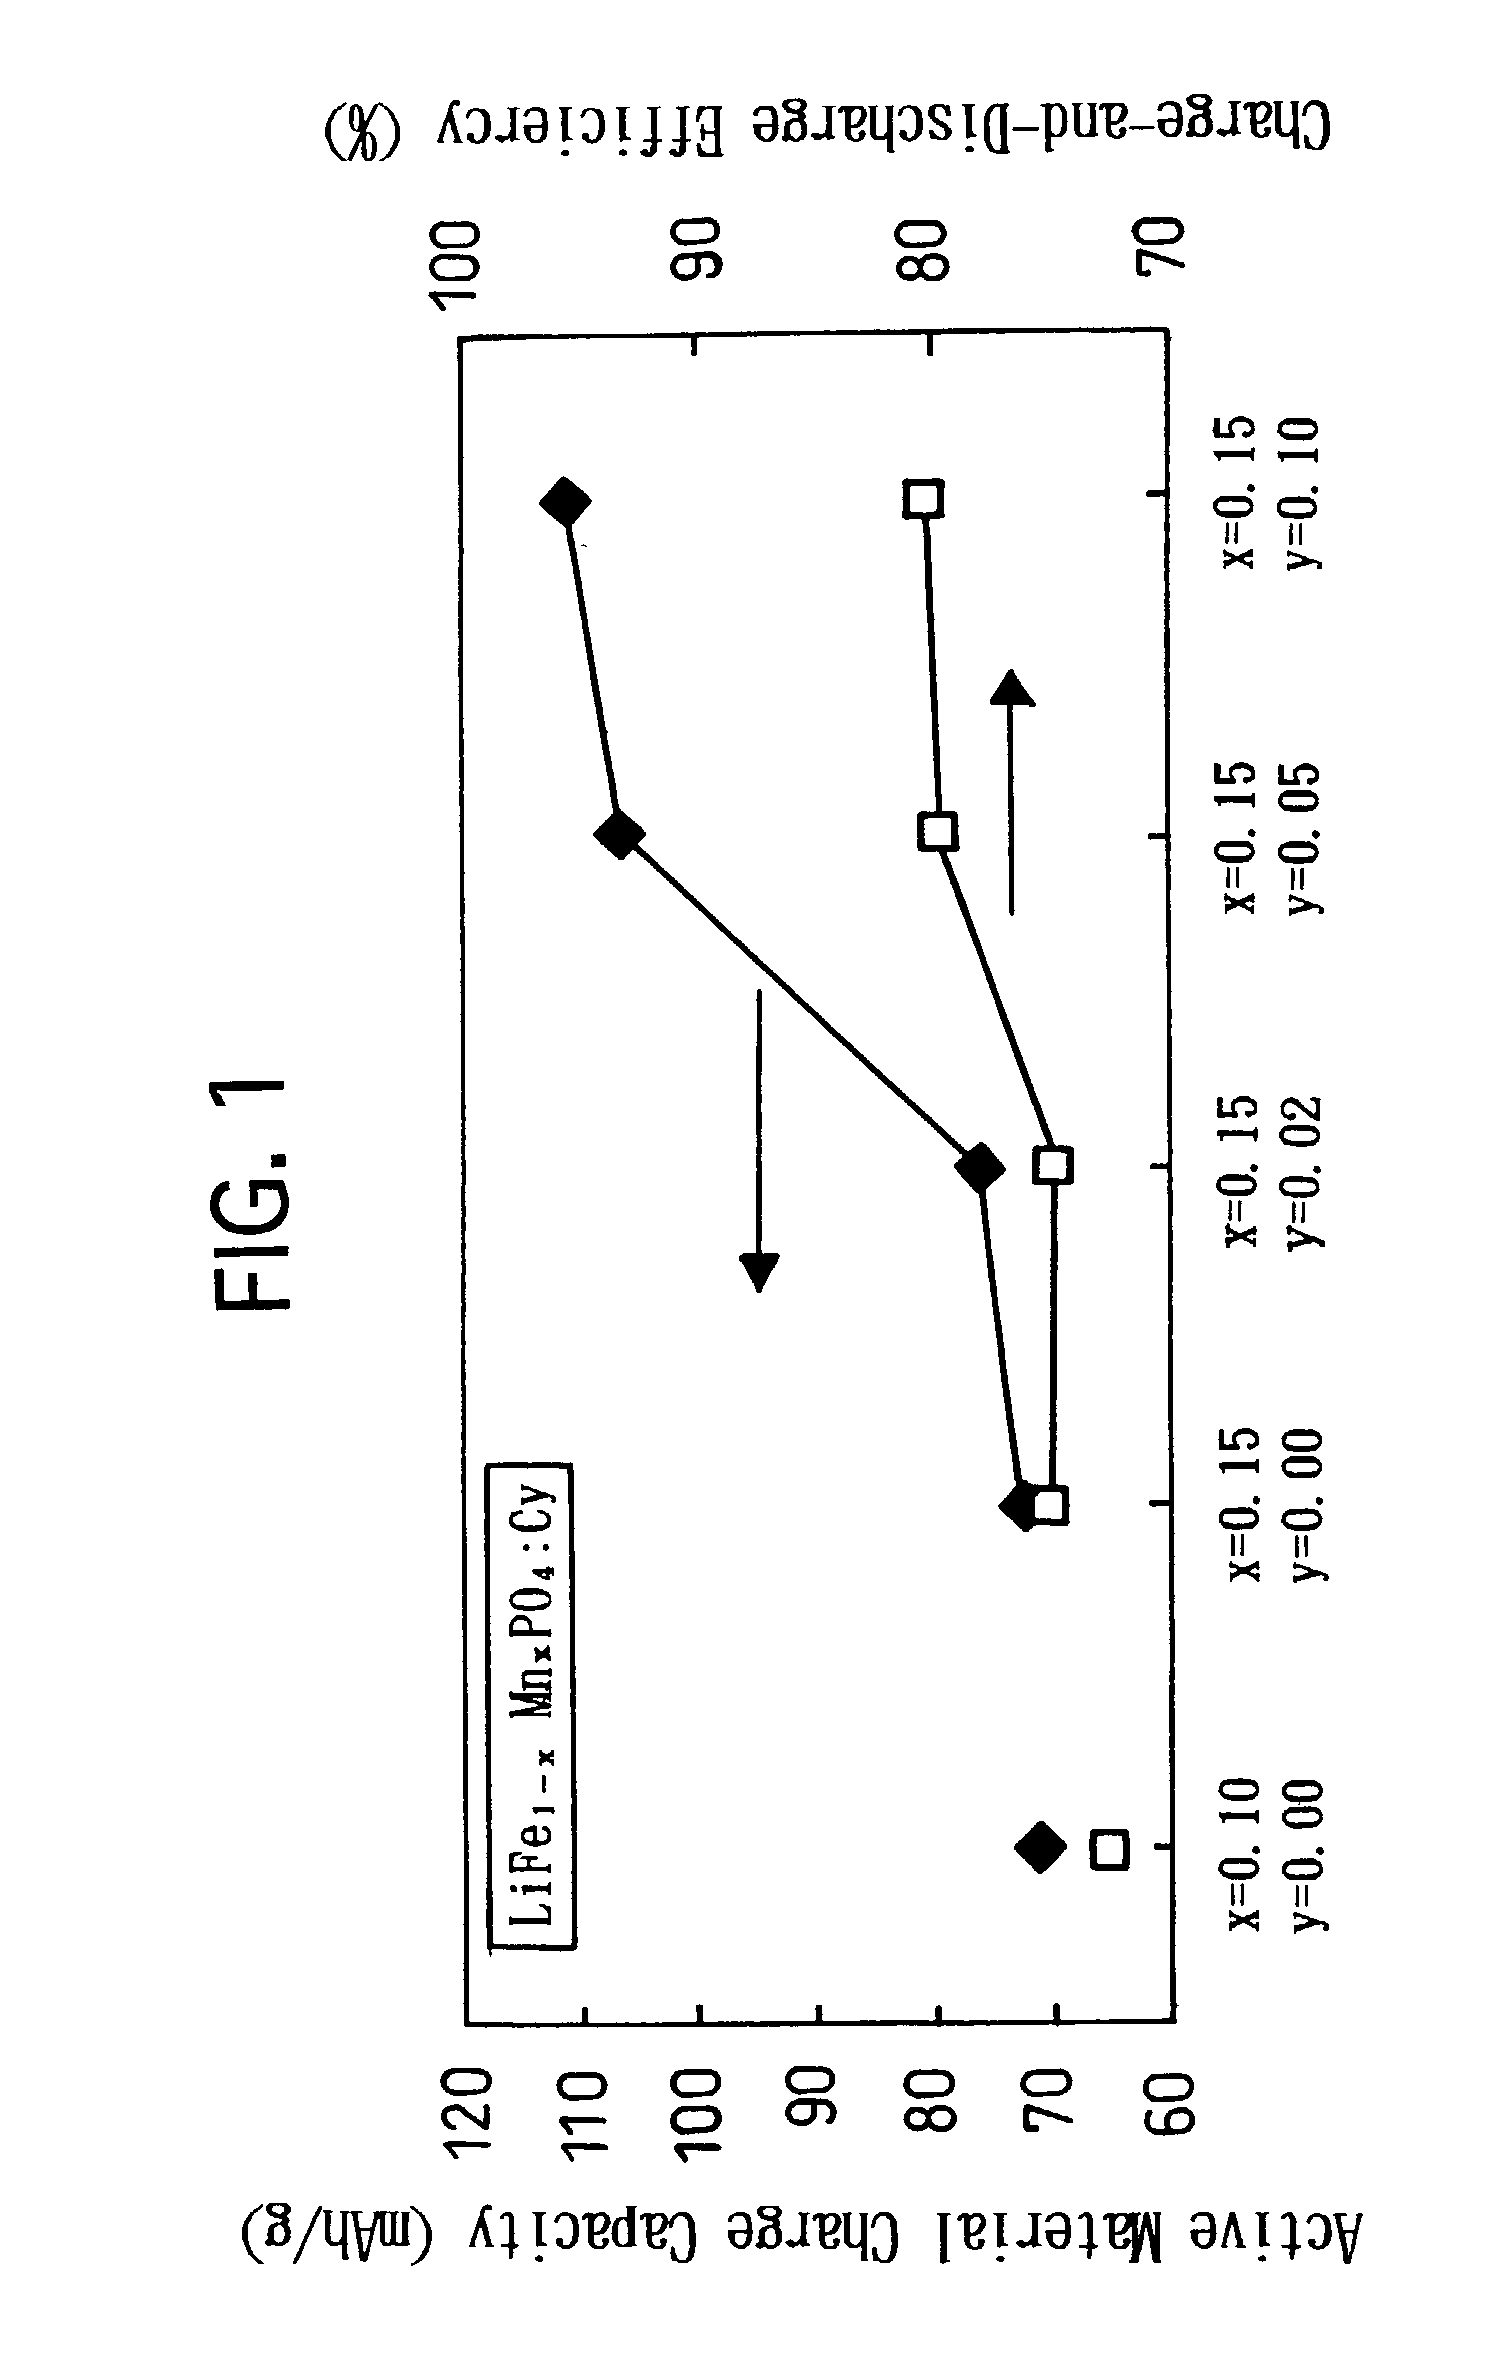 Carbon-containing lithium-iron composite phosphorus oxide for lithium secondary battery positive electrode active material and process for producing the same